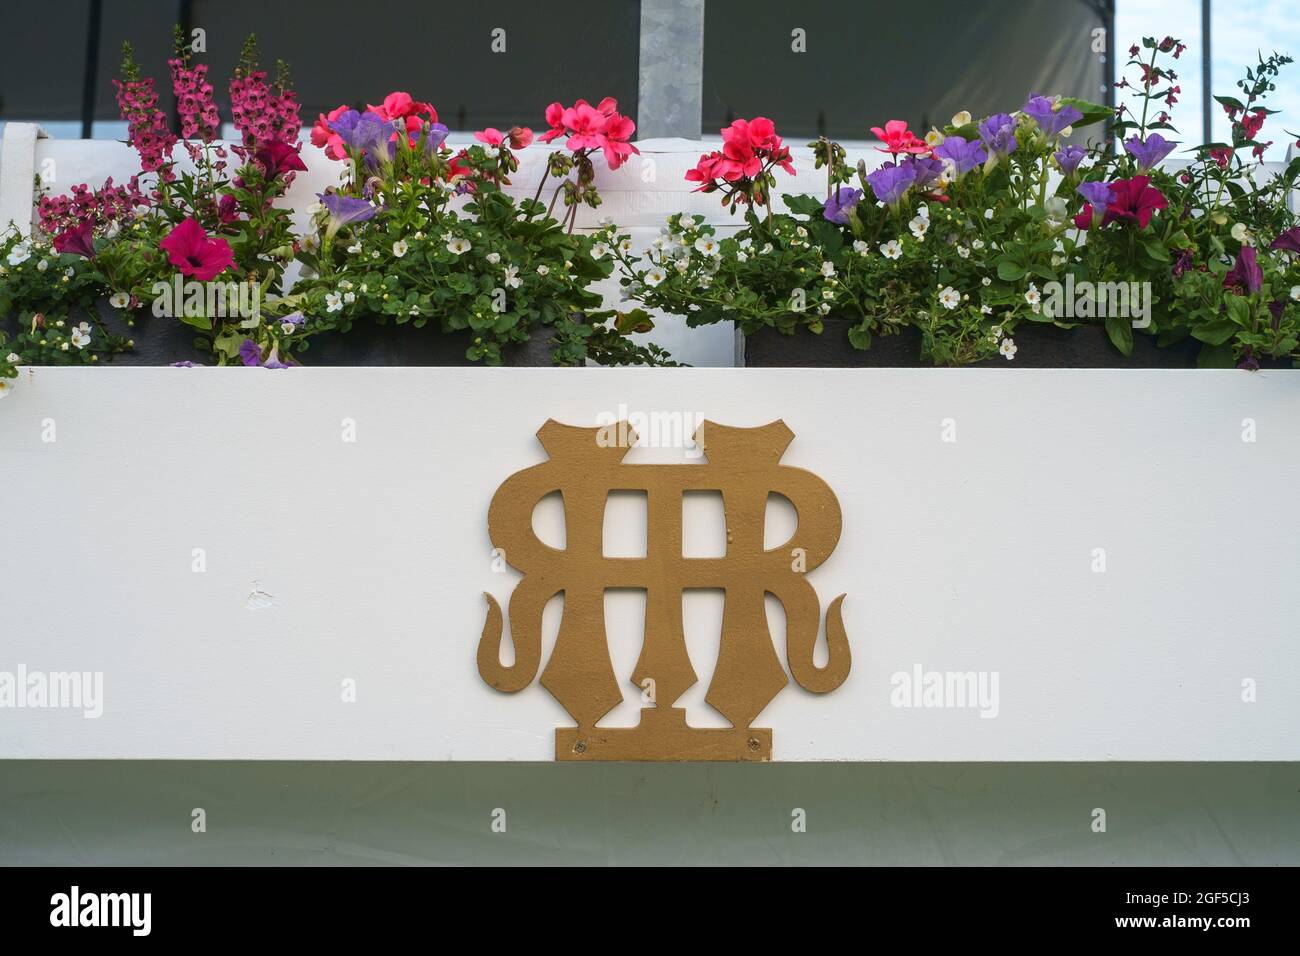 Decorative flower boxes on the main grandstand in the Stewards Enclosure at Henley Royal Regatta 2021 on the River Thames Stock Photo